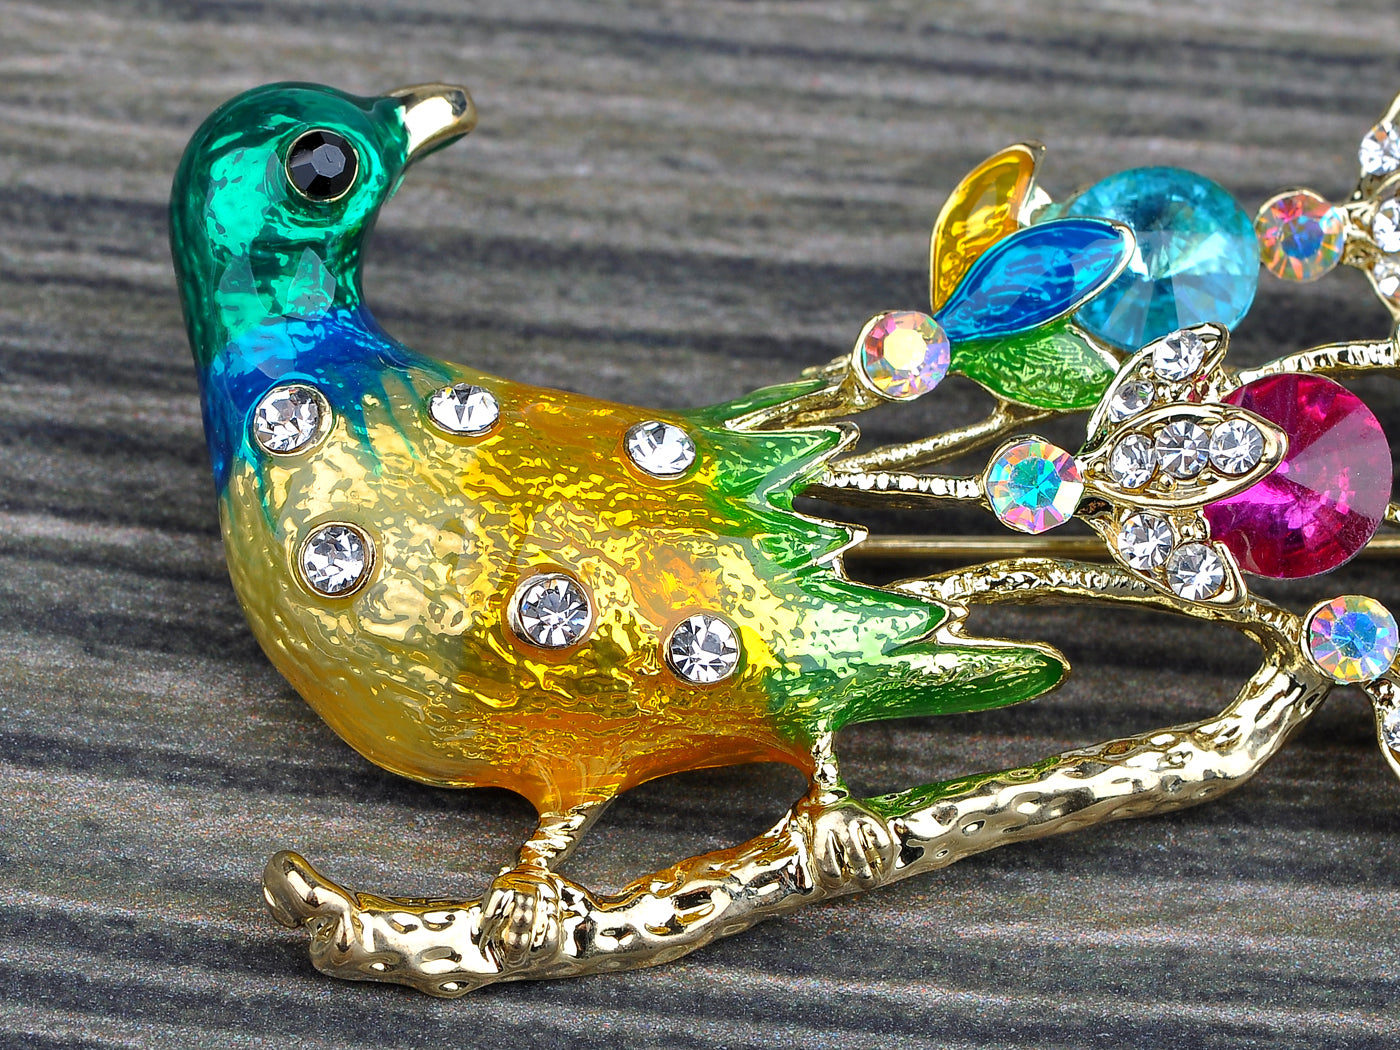 Soft Multicolored Colorful Peacock Bird Feather Brooch Pin